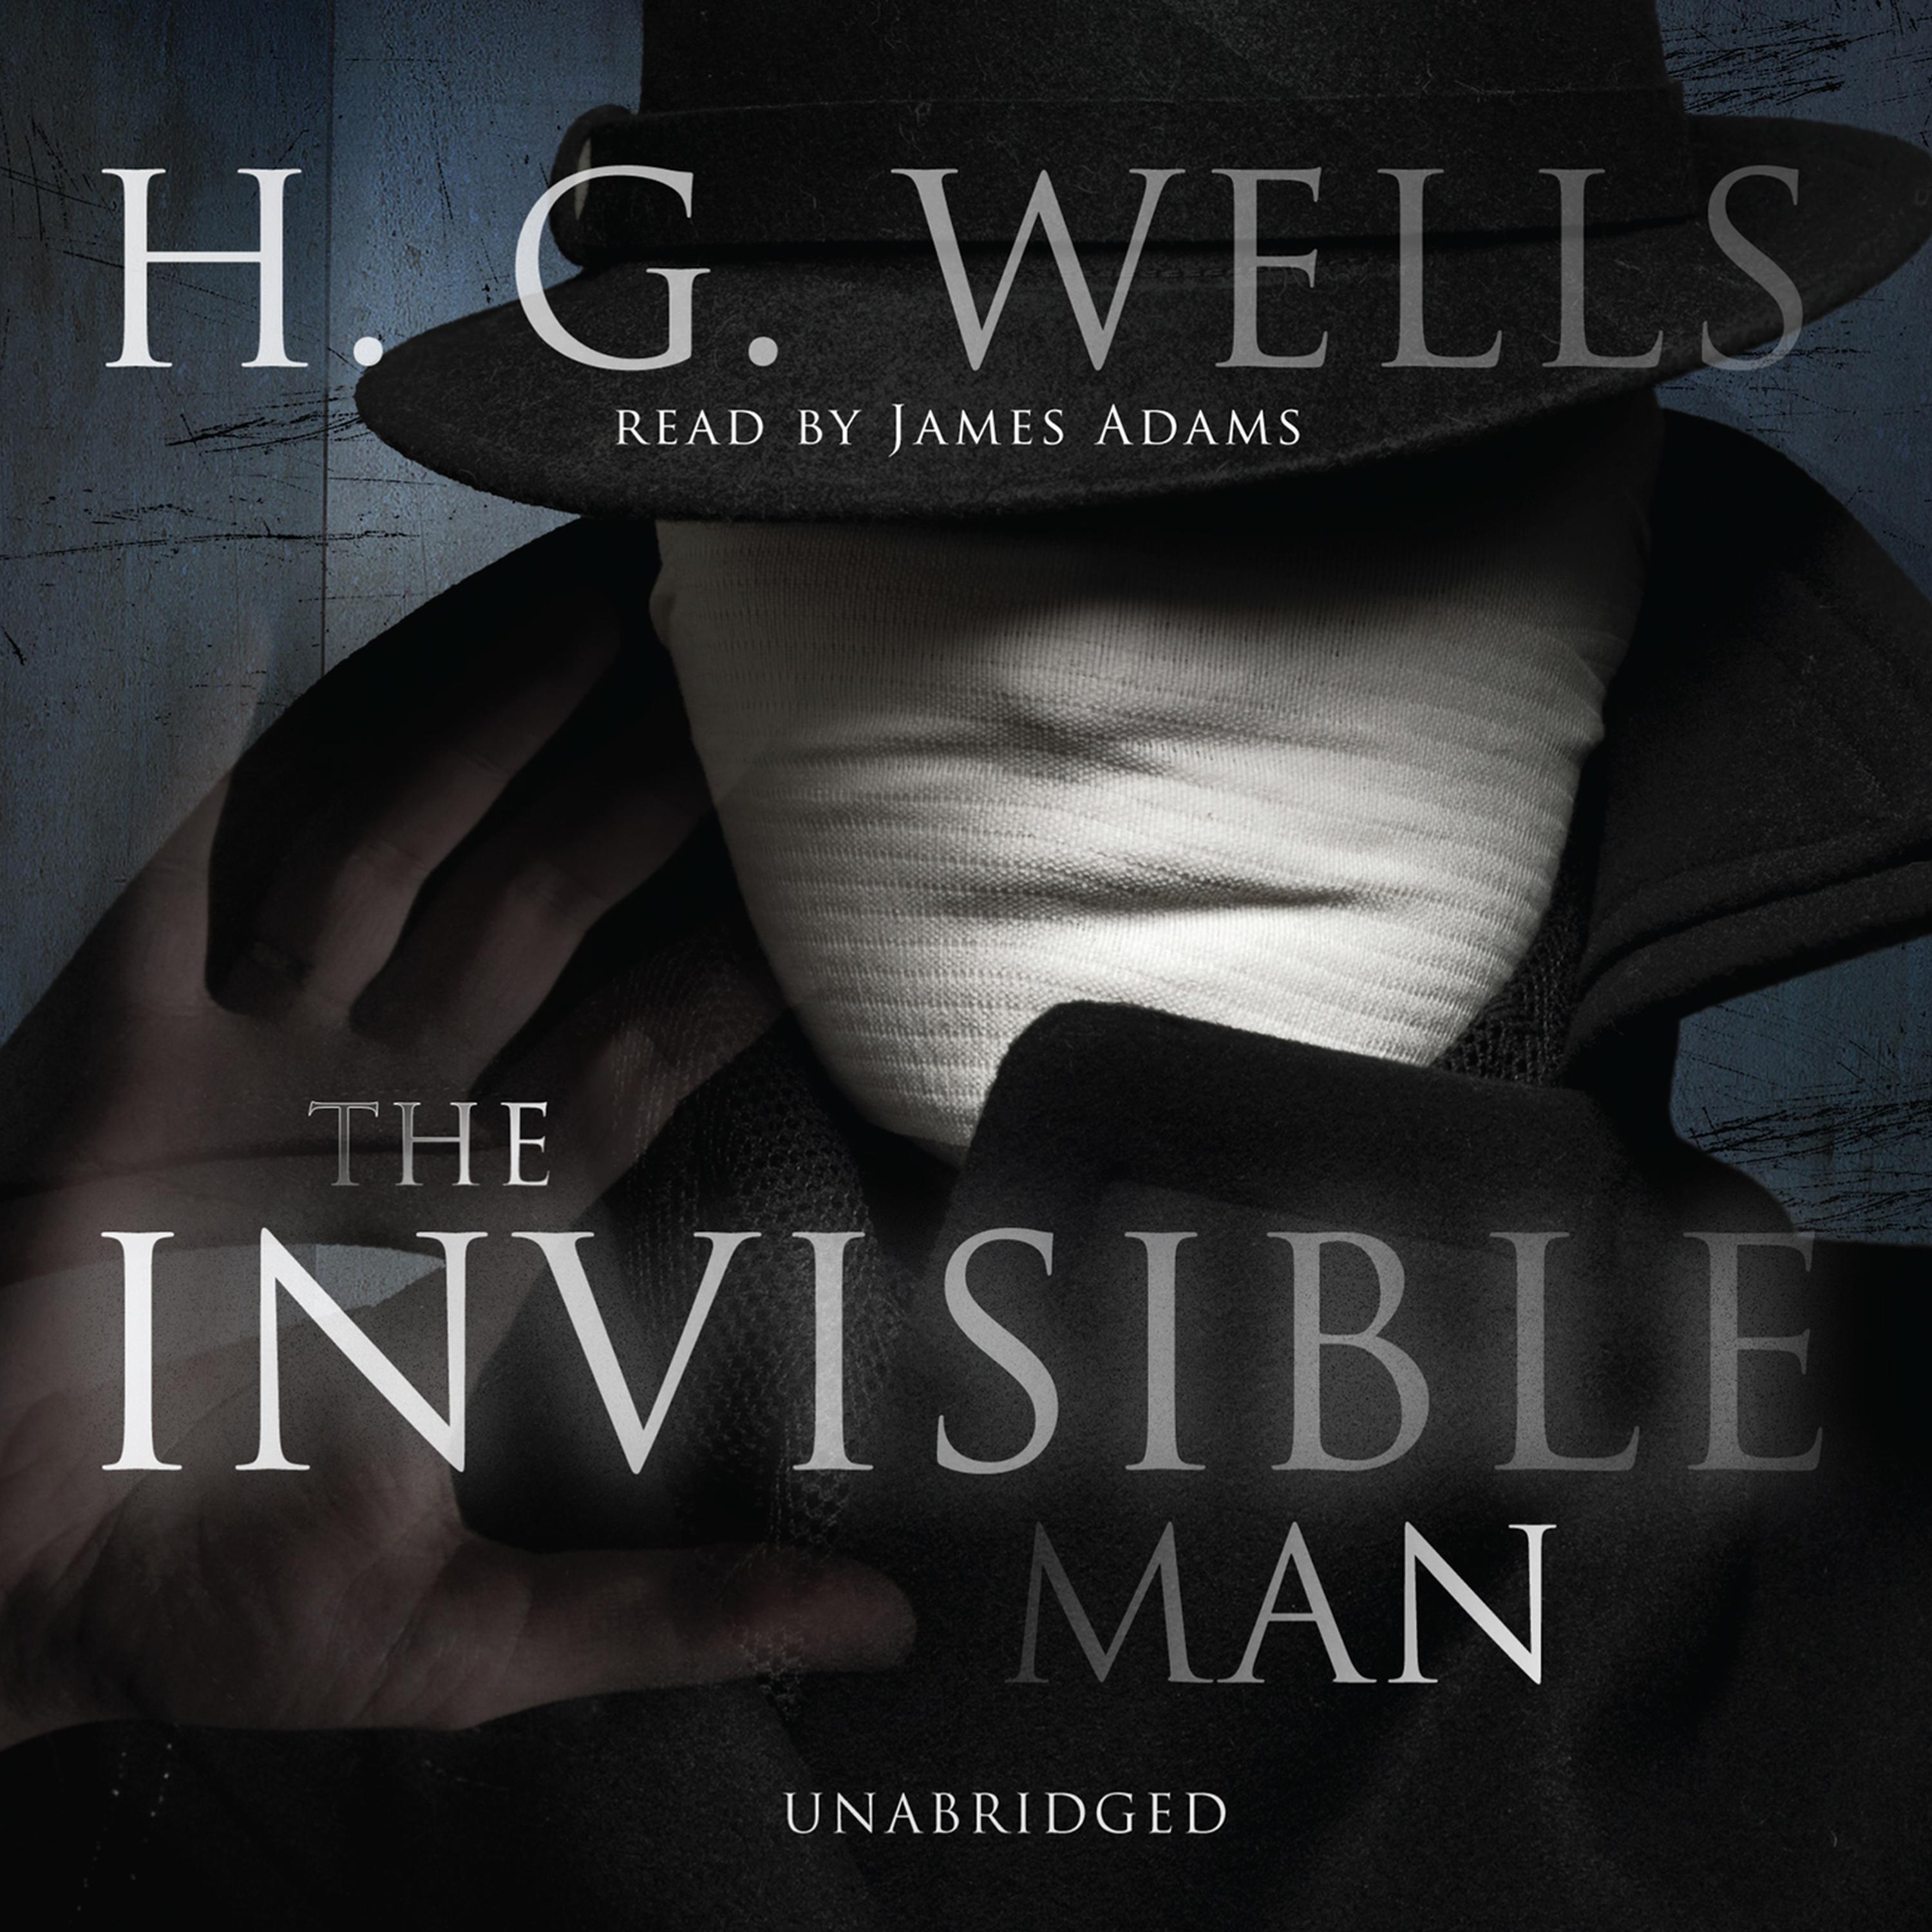 The Invisible Man - H.G. Wells - Google Books